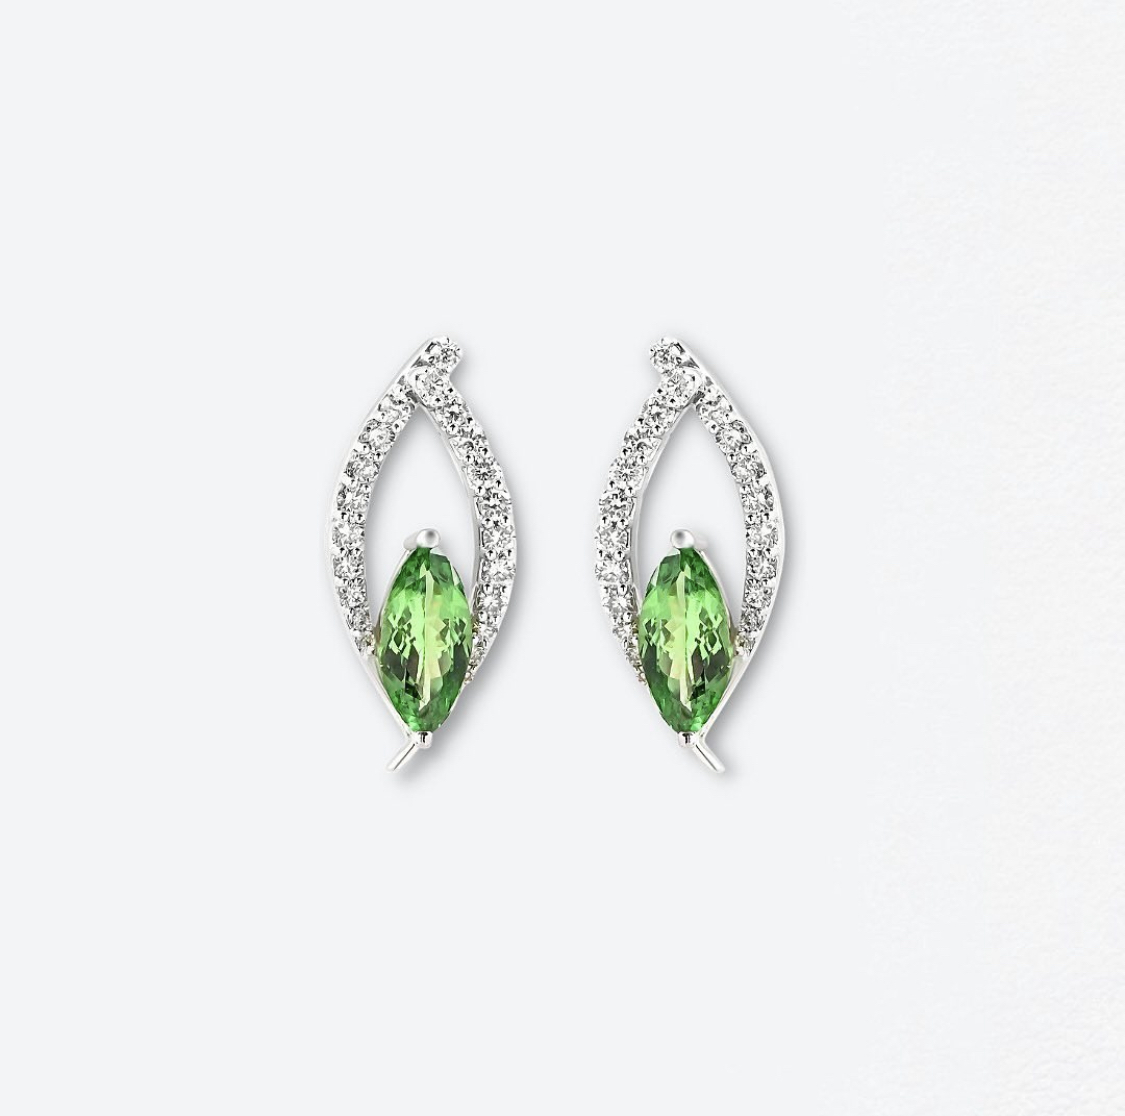 Make a statement with these timeless Tsavorite earrings. The rich, green tsavorite gemstones are beautifully embraced by brilliant diamonds, reflecting your unique style and captivating charm.
#jewelryobsession #sparkleandshine #tsavorite